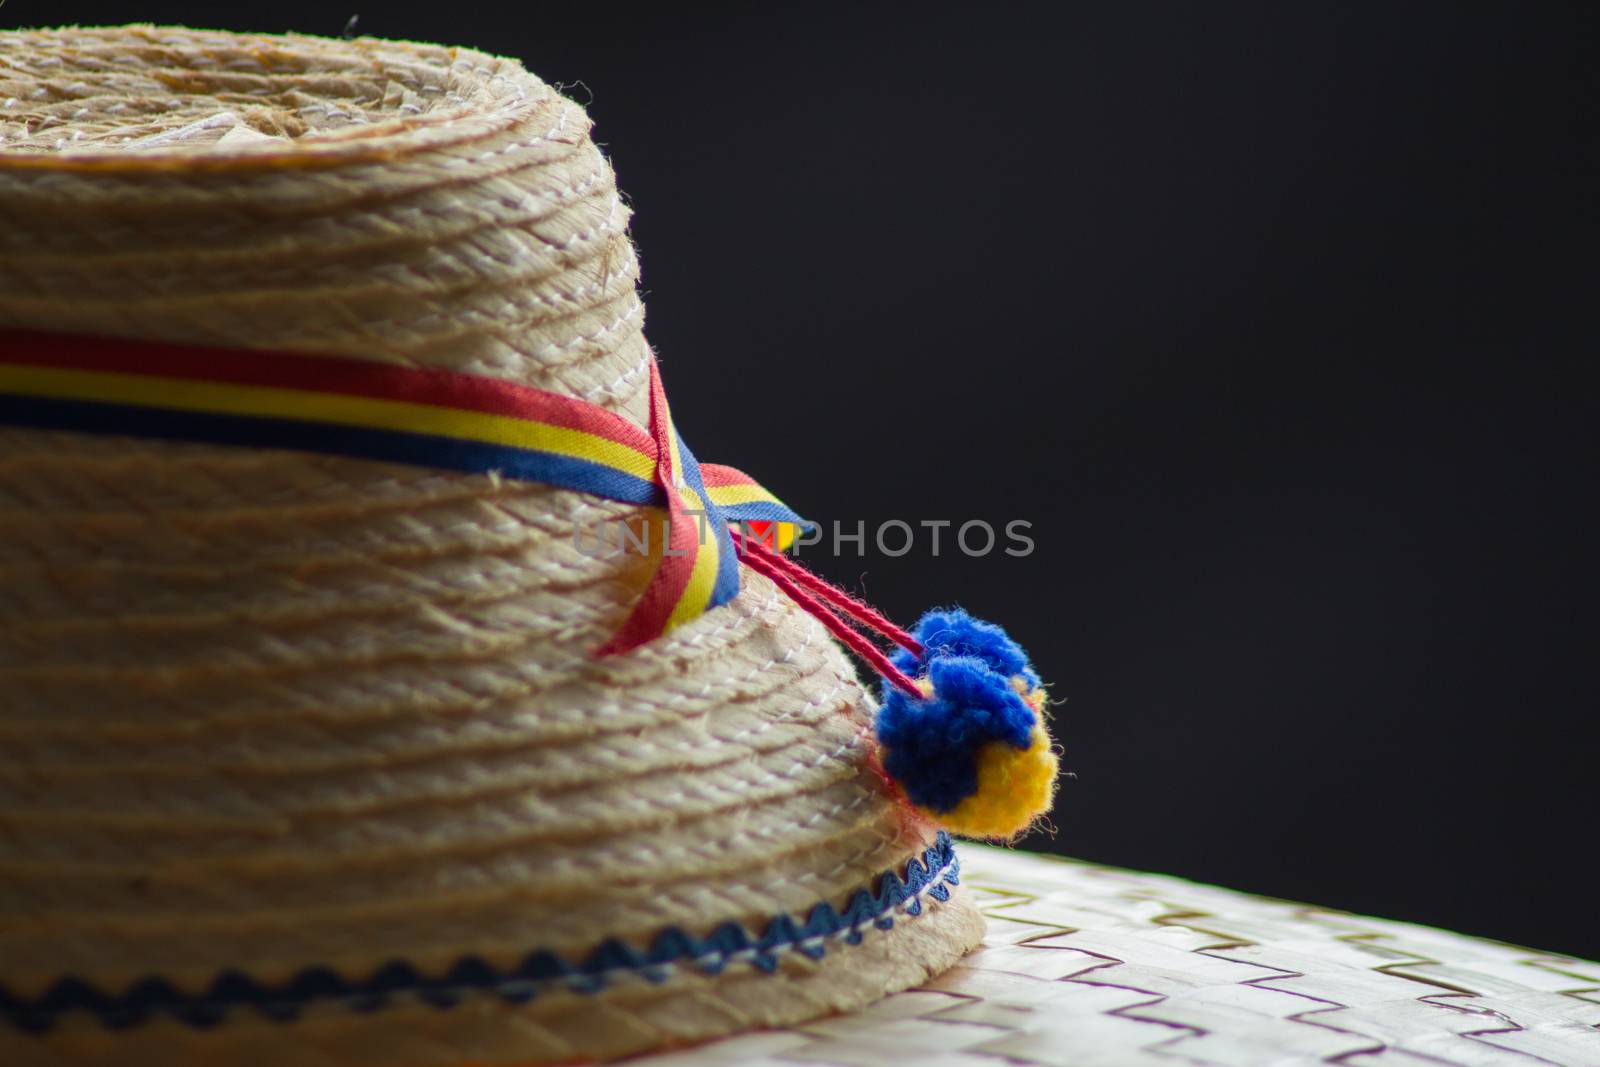 The Maramures traditional hat by robertboss